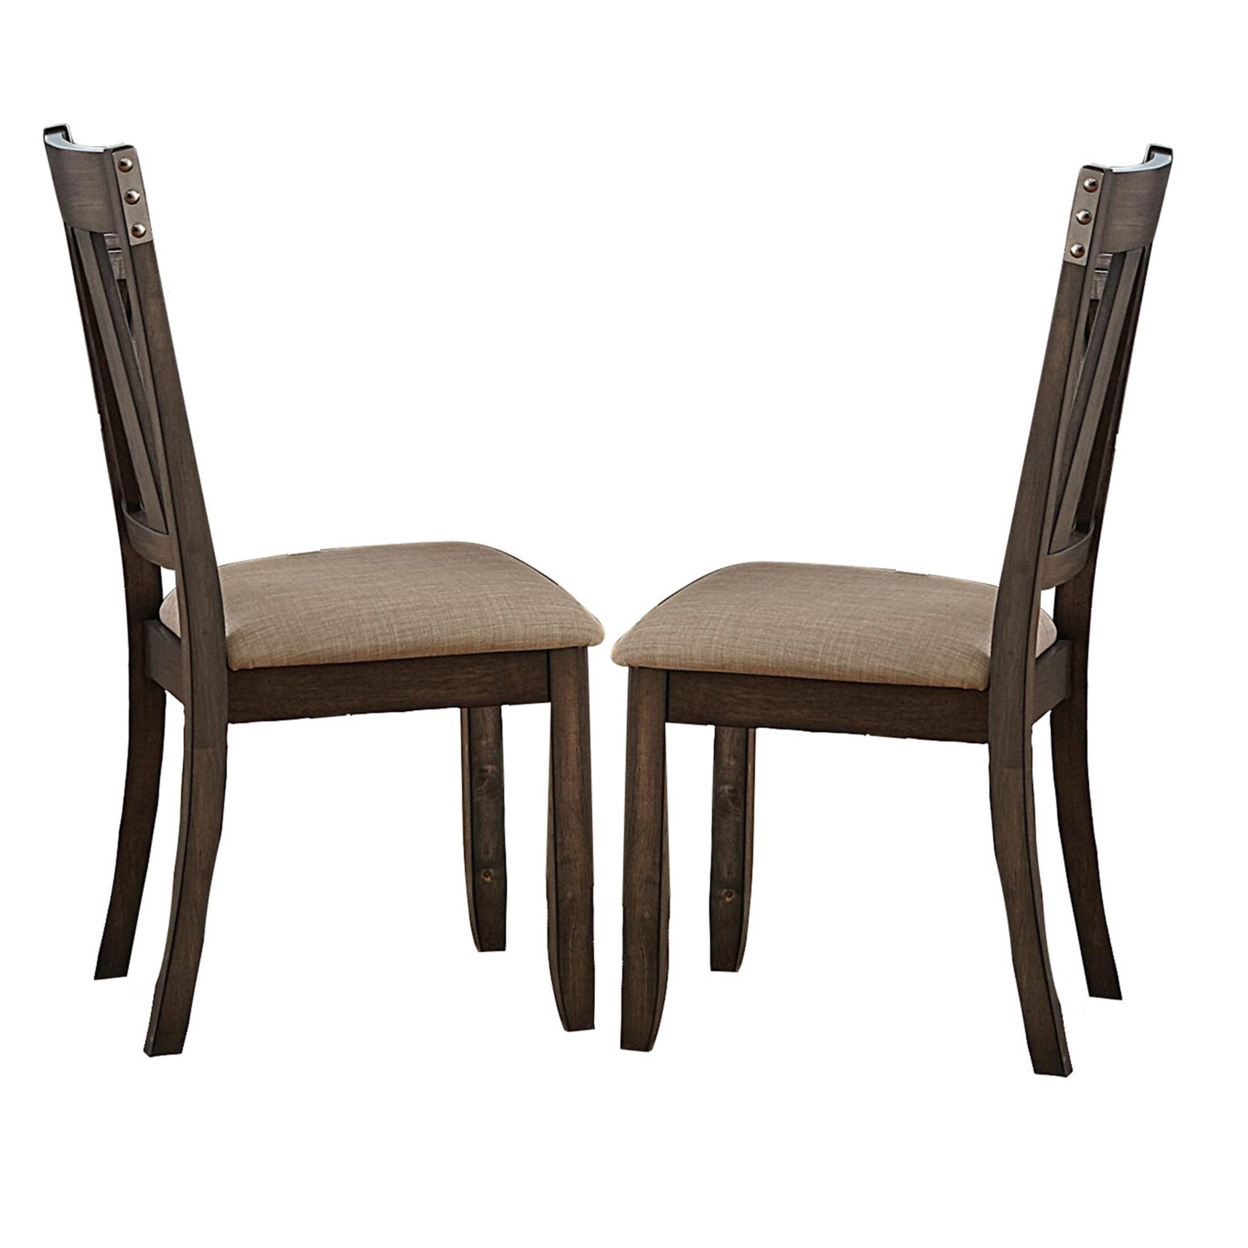 Wood Side Chair With Slightly Flared Back Legs, Brown, Set Of 2- Saltoro Sherpi